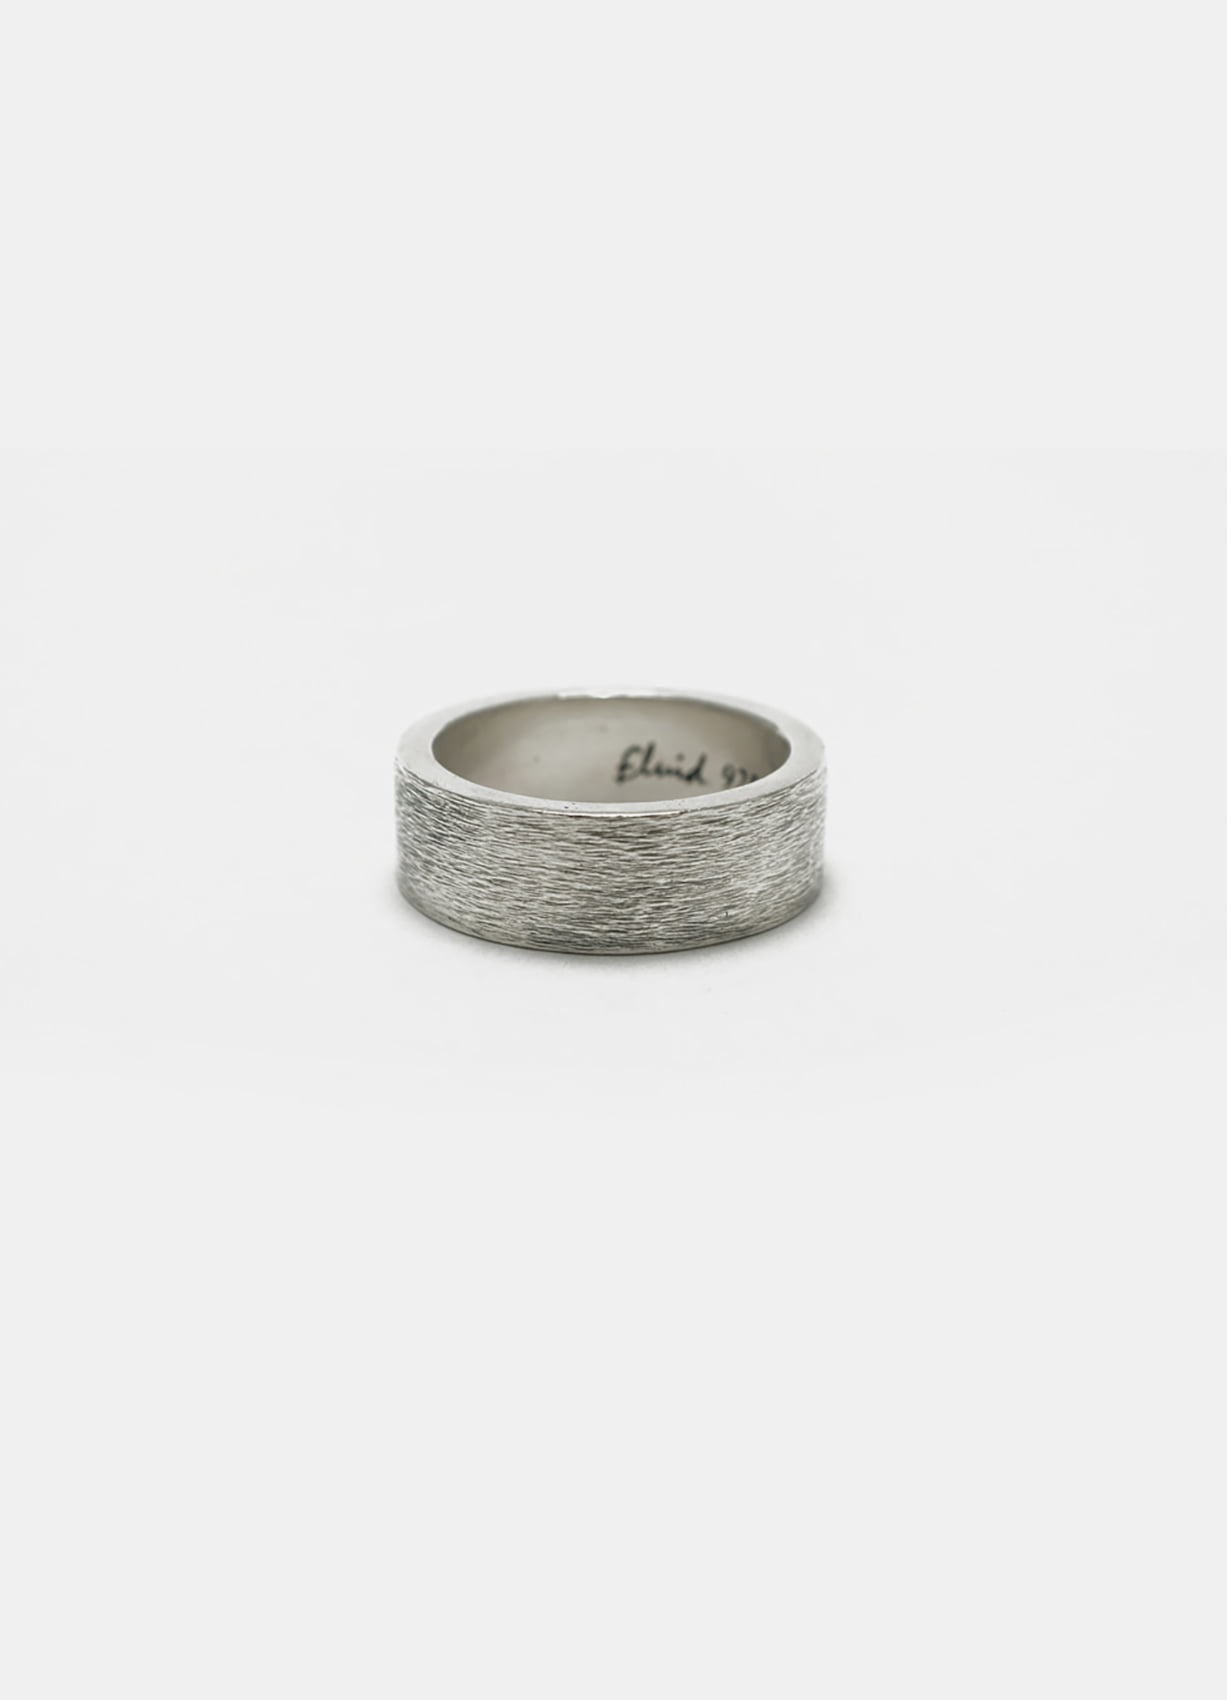 fluid 7mm raw band ring